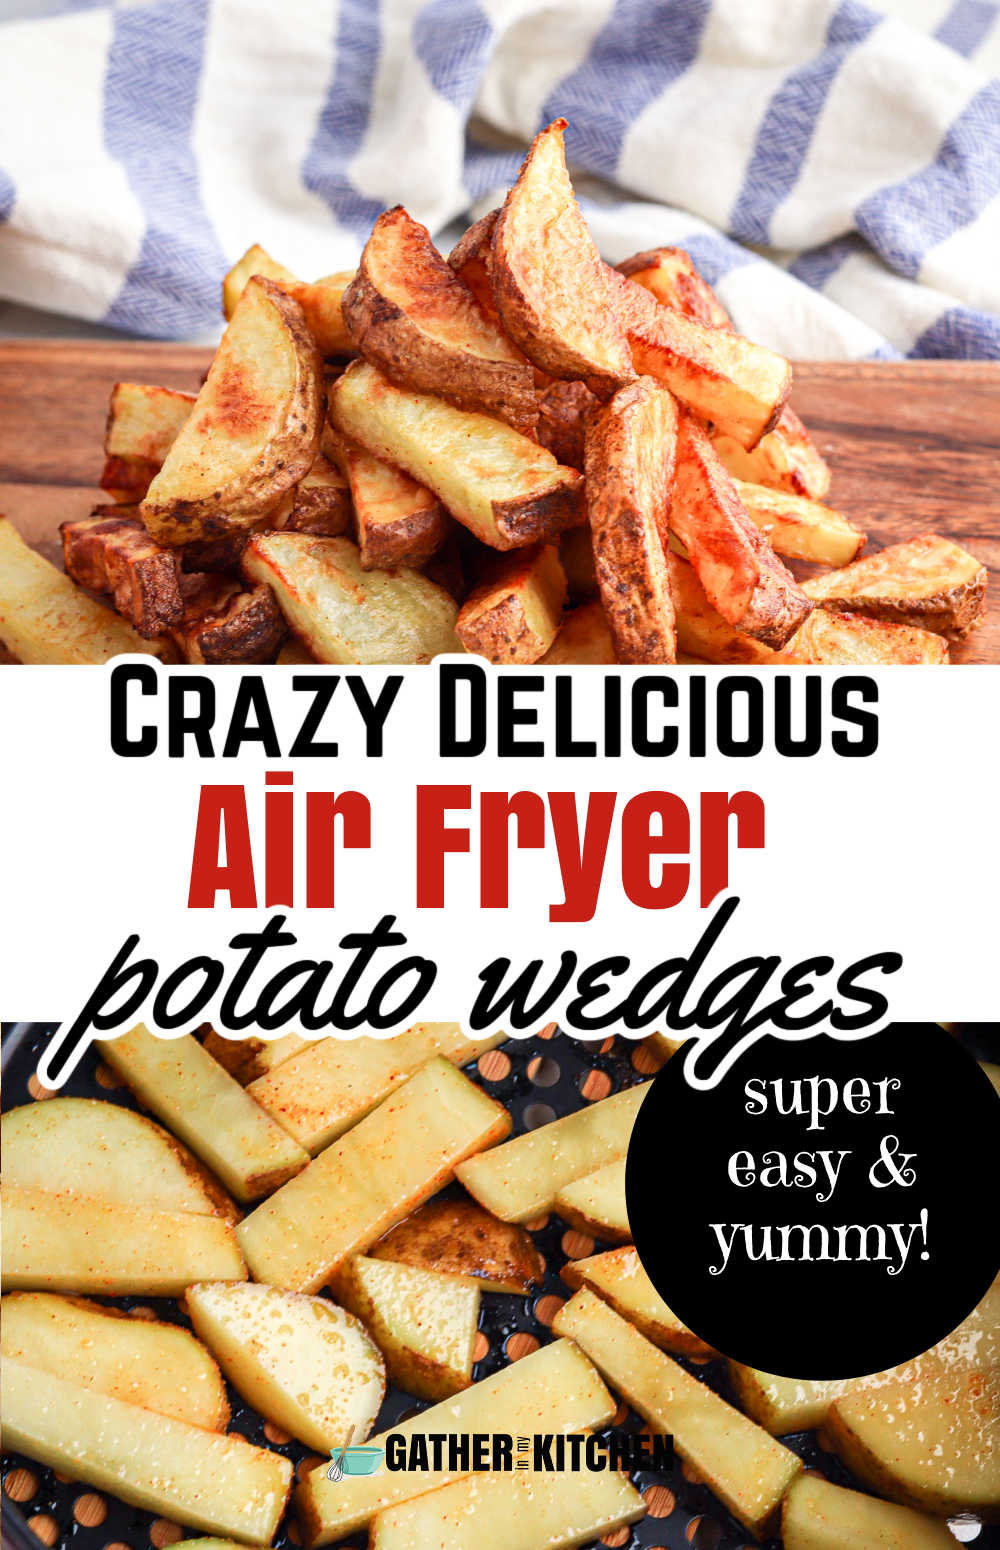 Pin image: top has a pile of potato wedges, middle says "crazy delicious air fryer potato wedges: super easy & yummy" and bottom is a closeup of raw potato wedges in an air fryer basket.